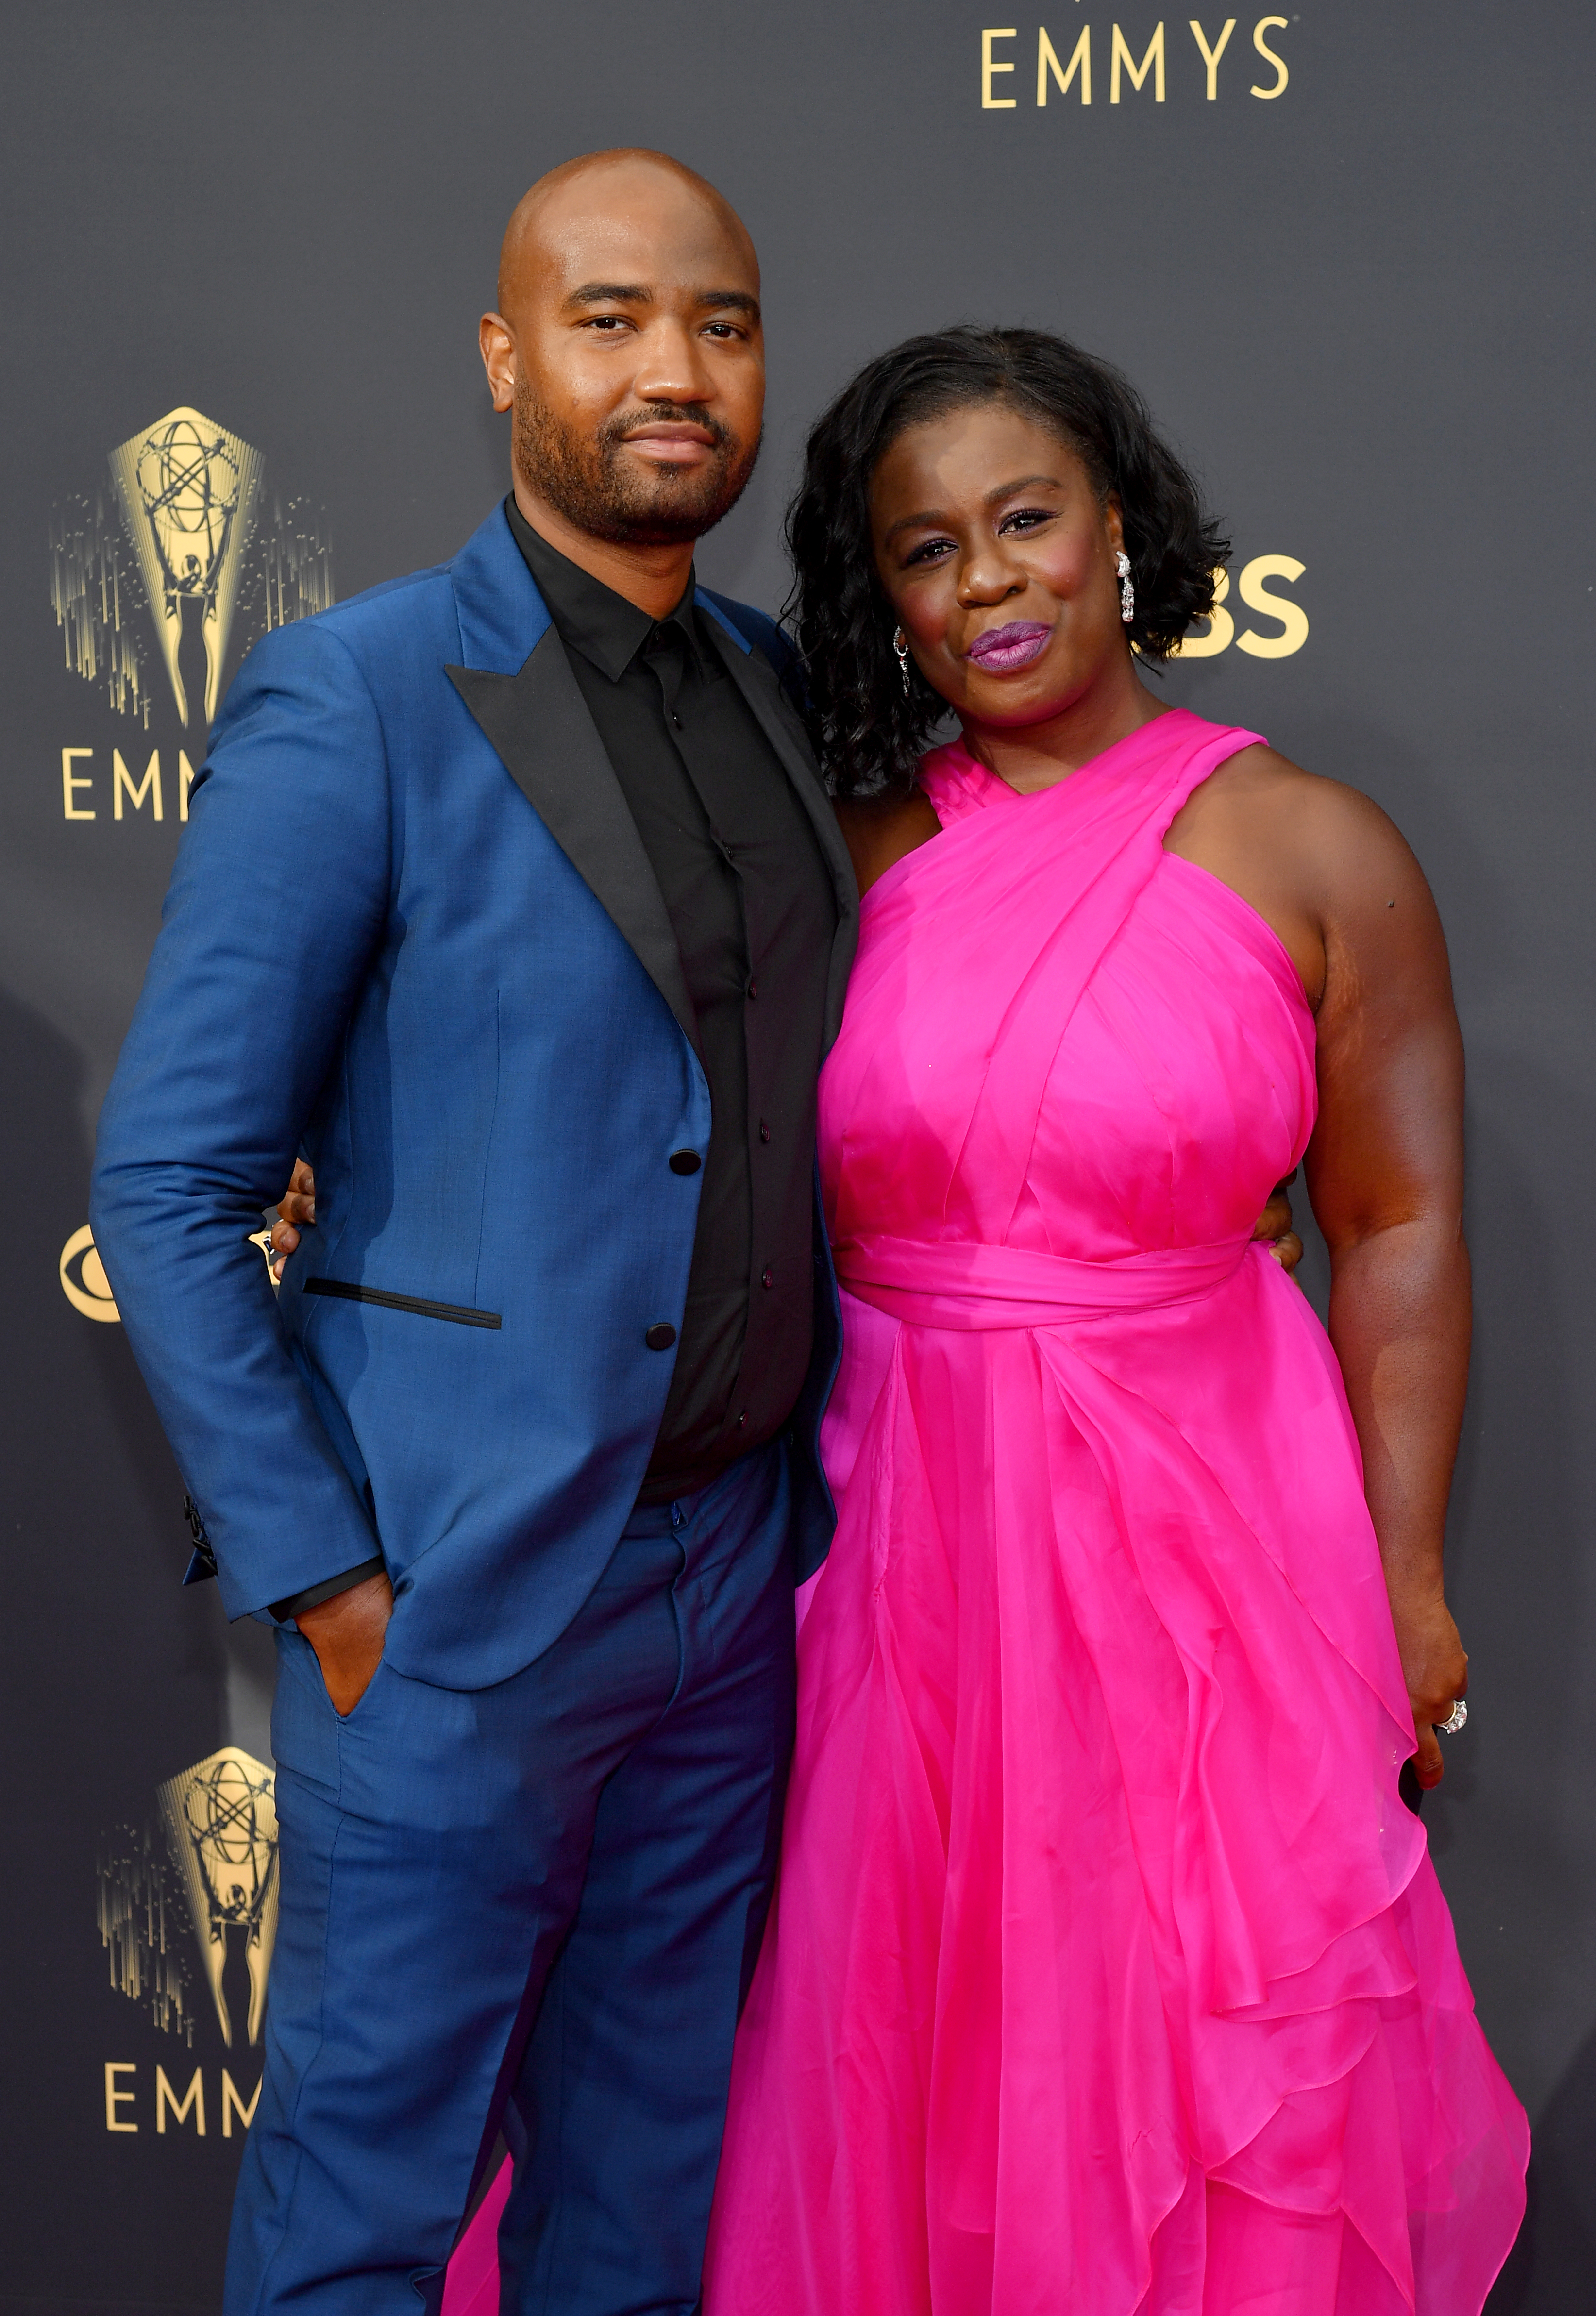 Robert Sweeting and Uzo Aduba at the 73rd Primetime Emmy Awards on September 19, 2021, in Los Angeles, California. | Source: Getty Images